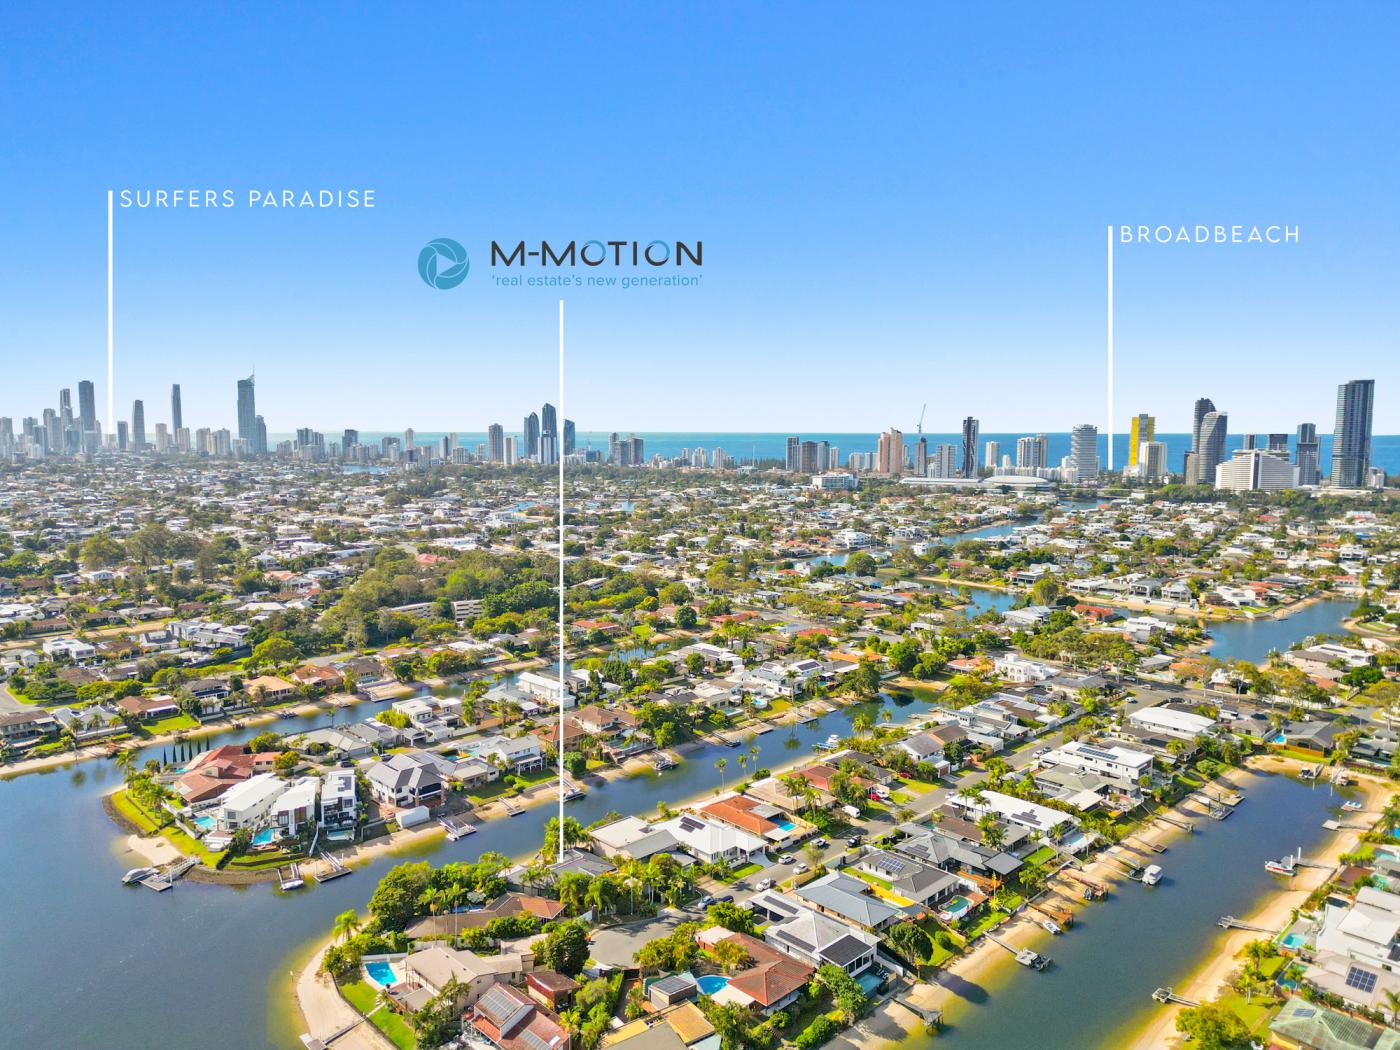 M-Motion Real Estate Agency, 27 Coobowie Street, Broadbeach Waters, Qld 4218, Michael Mahon, Lauren Mahon, Best Real Estate Agent Gold Coast